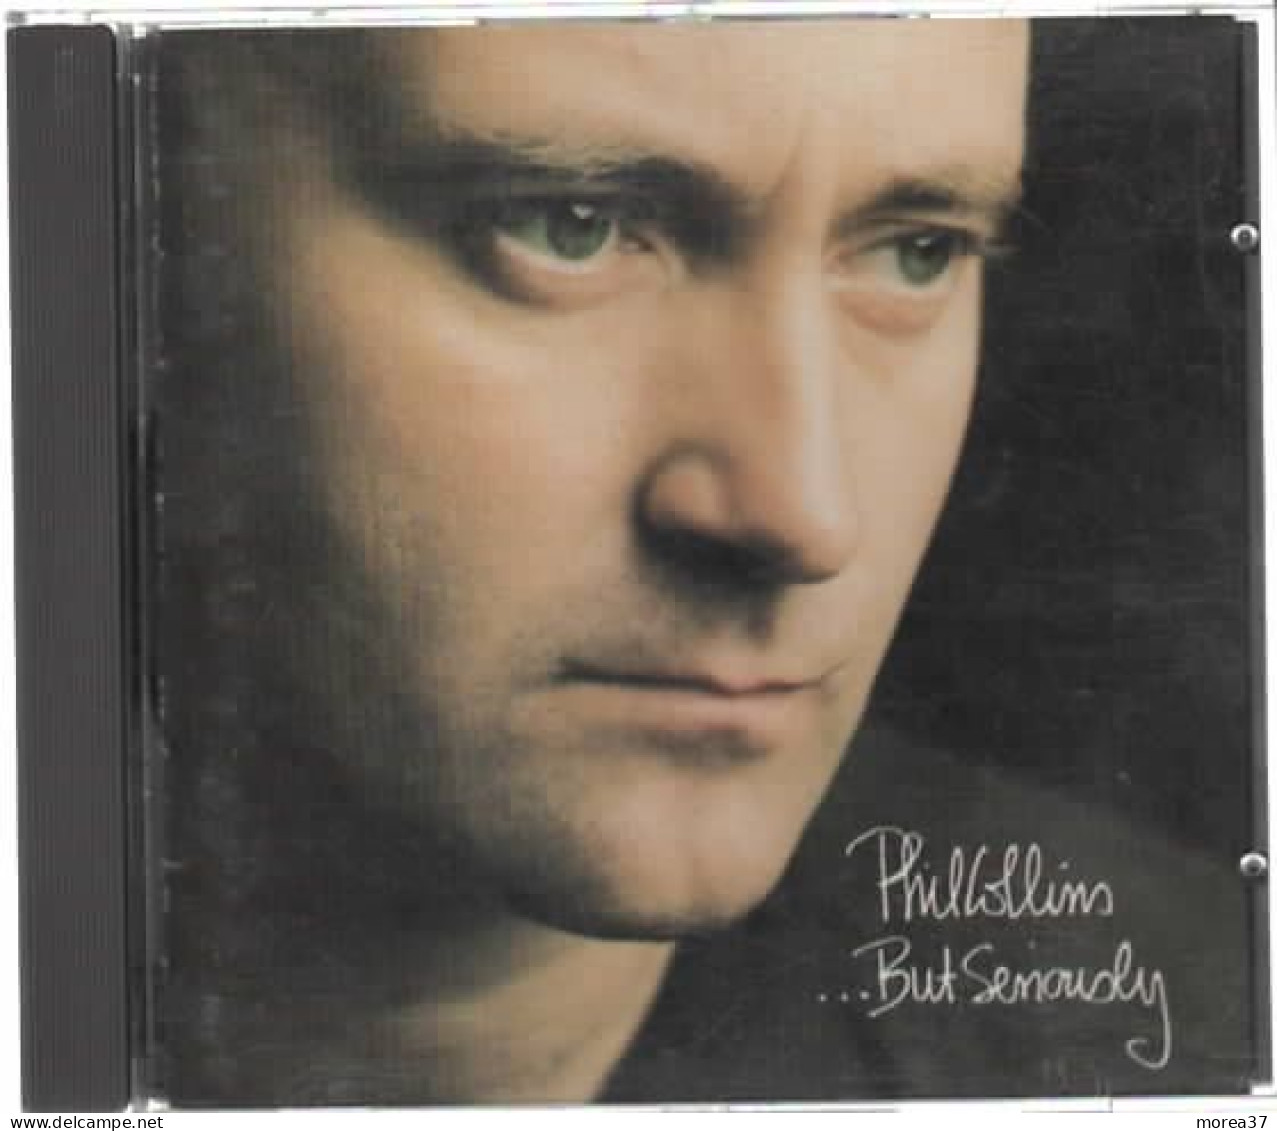 PHIL COLLINS  But Senously - Other - English Music